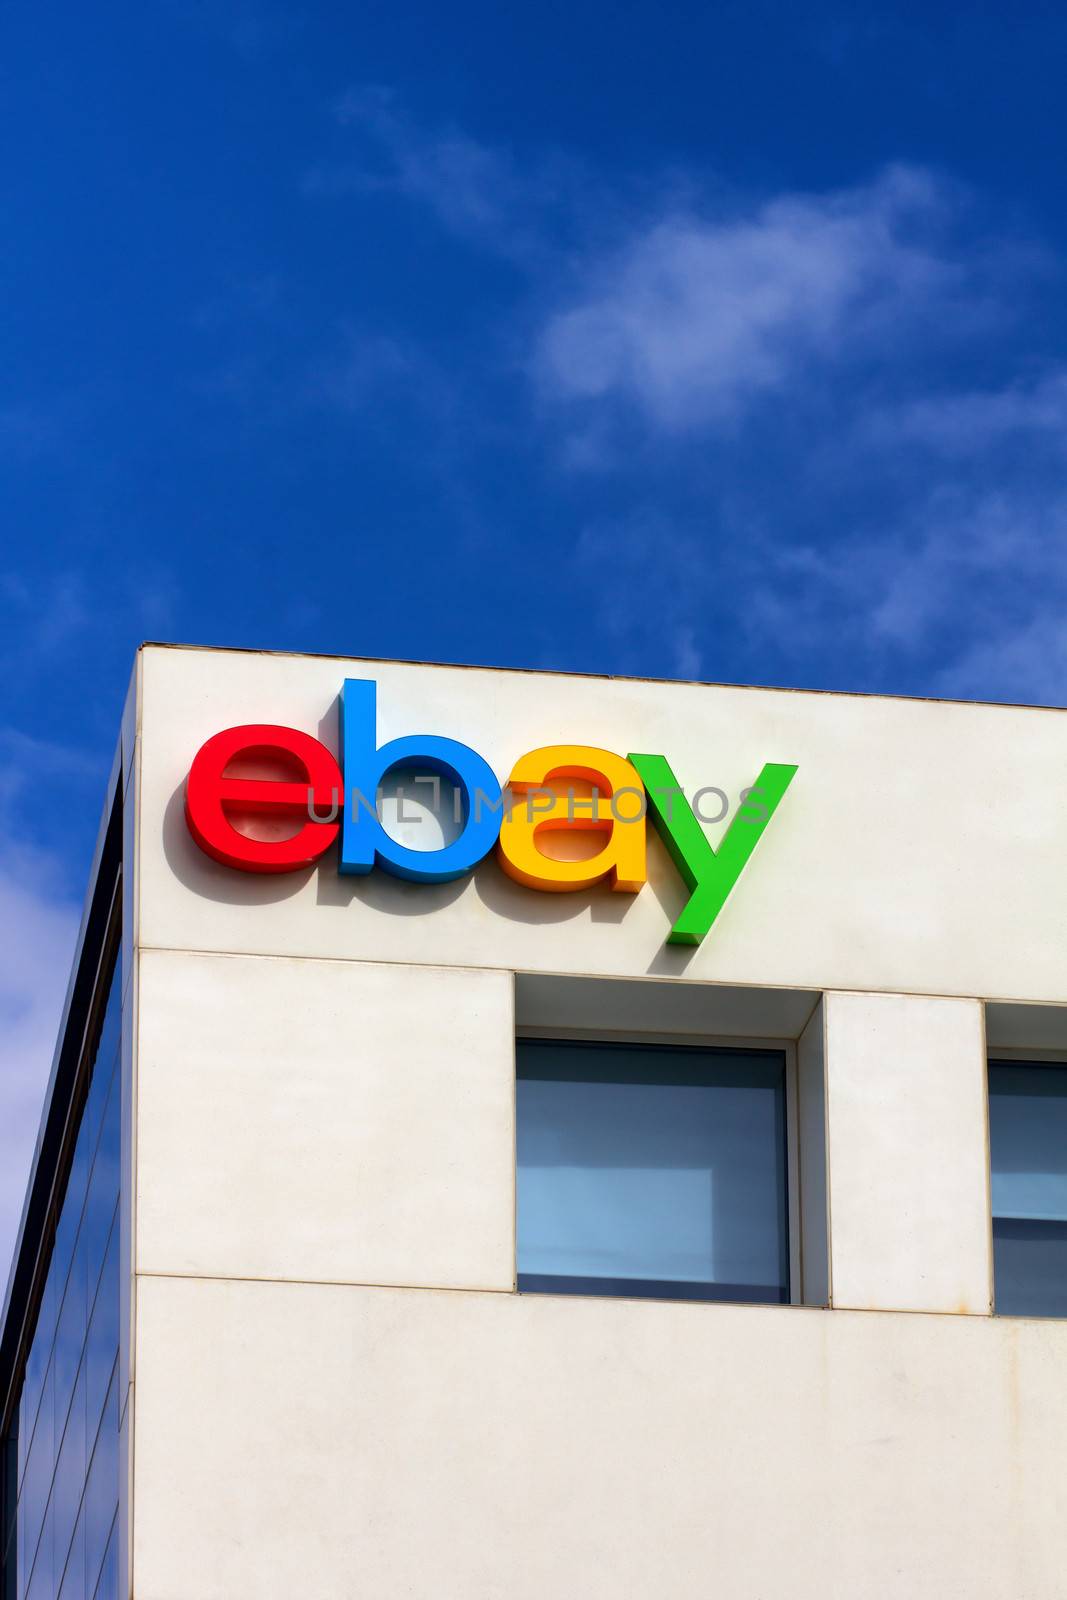 Ebay Corporate Headquarters Sign by wolterk